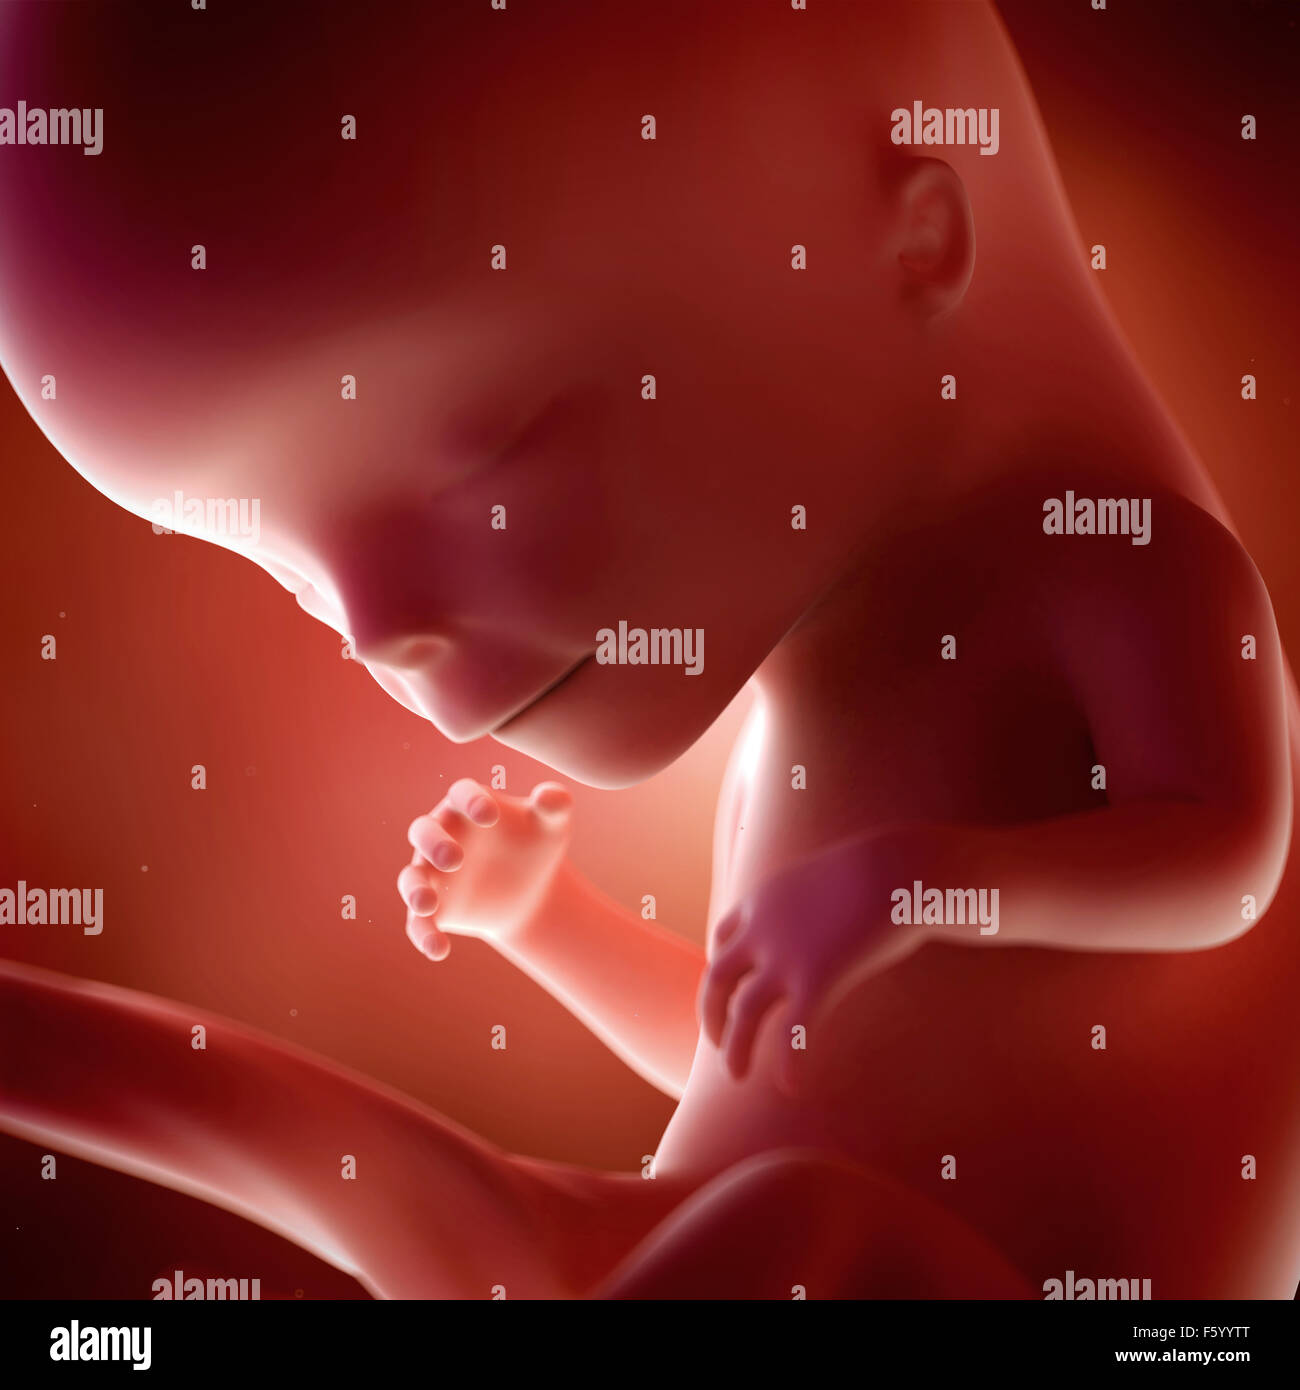 medical accurate 3d illustration of a fetus week 12 Stock Photo